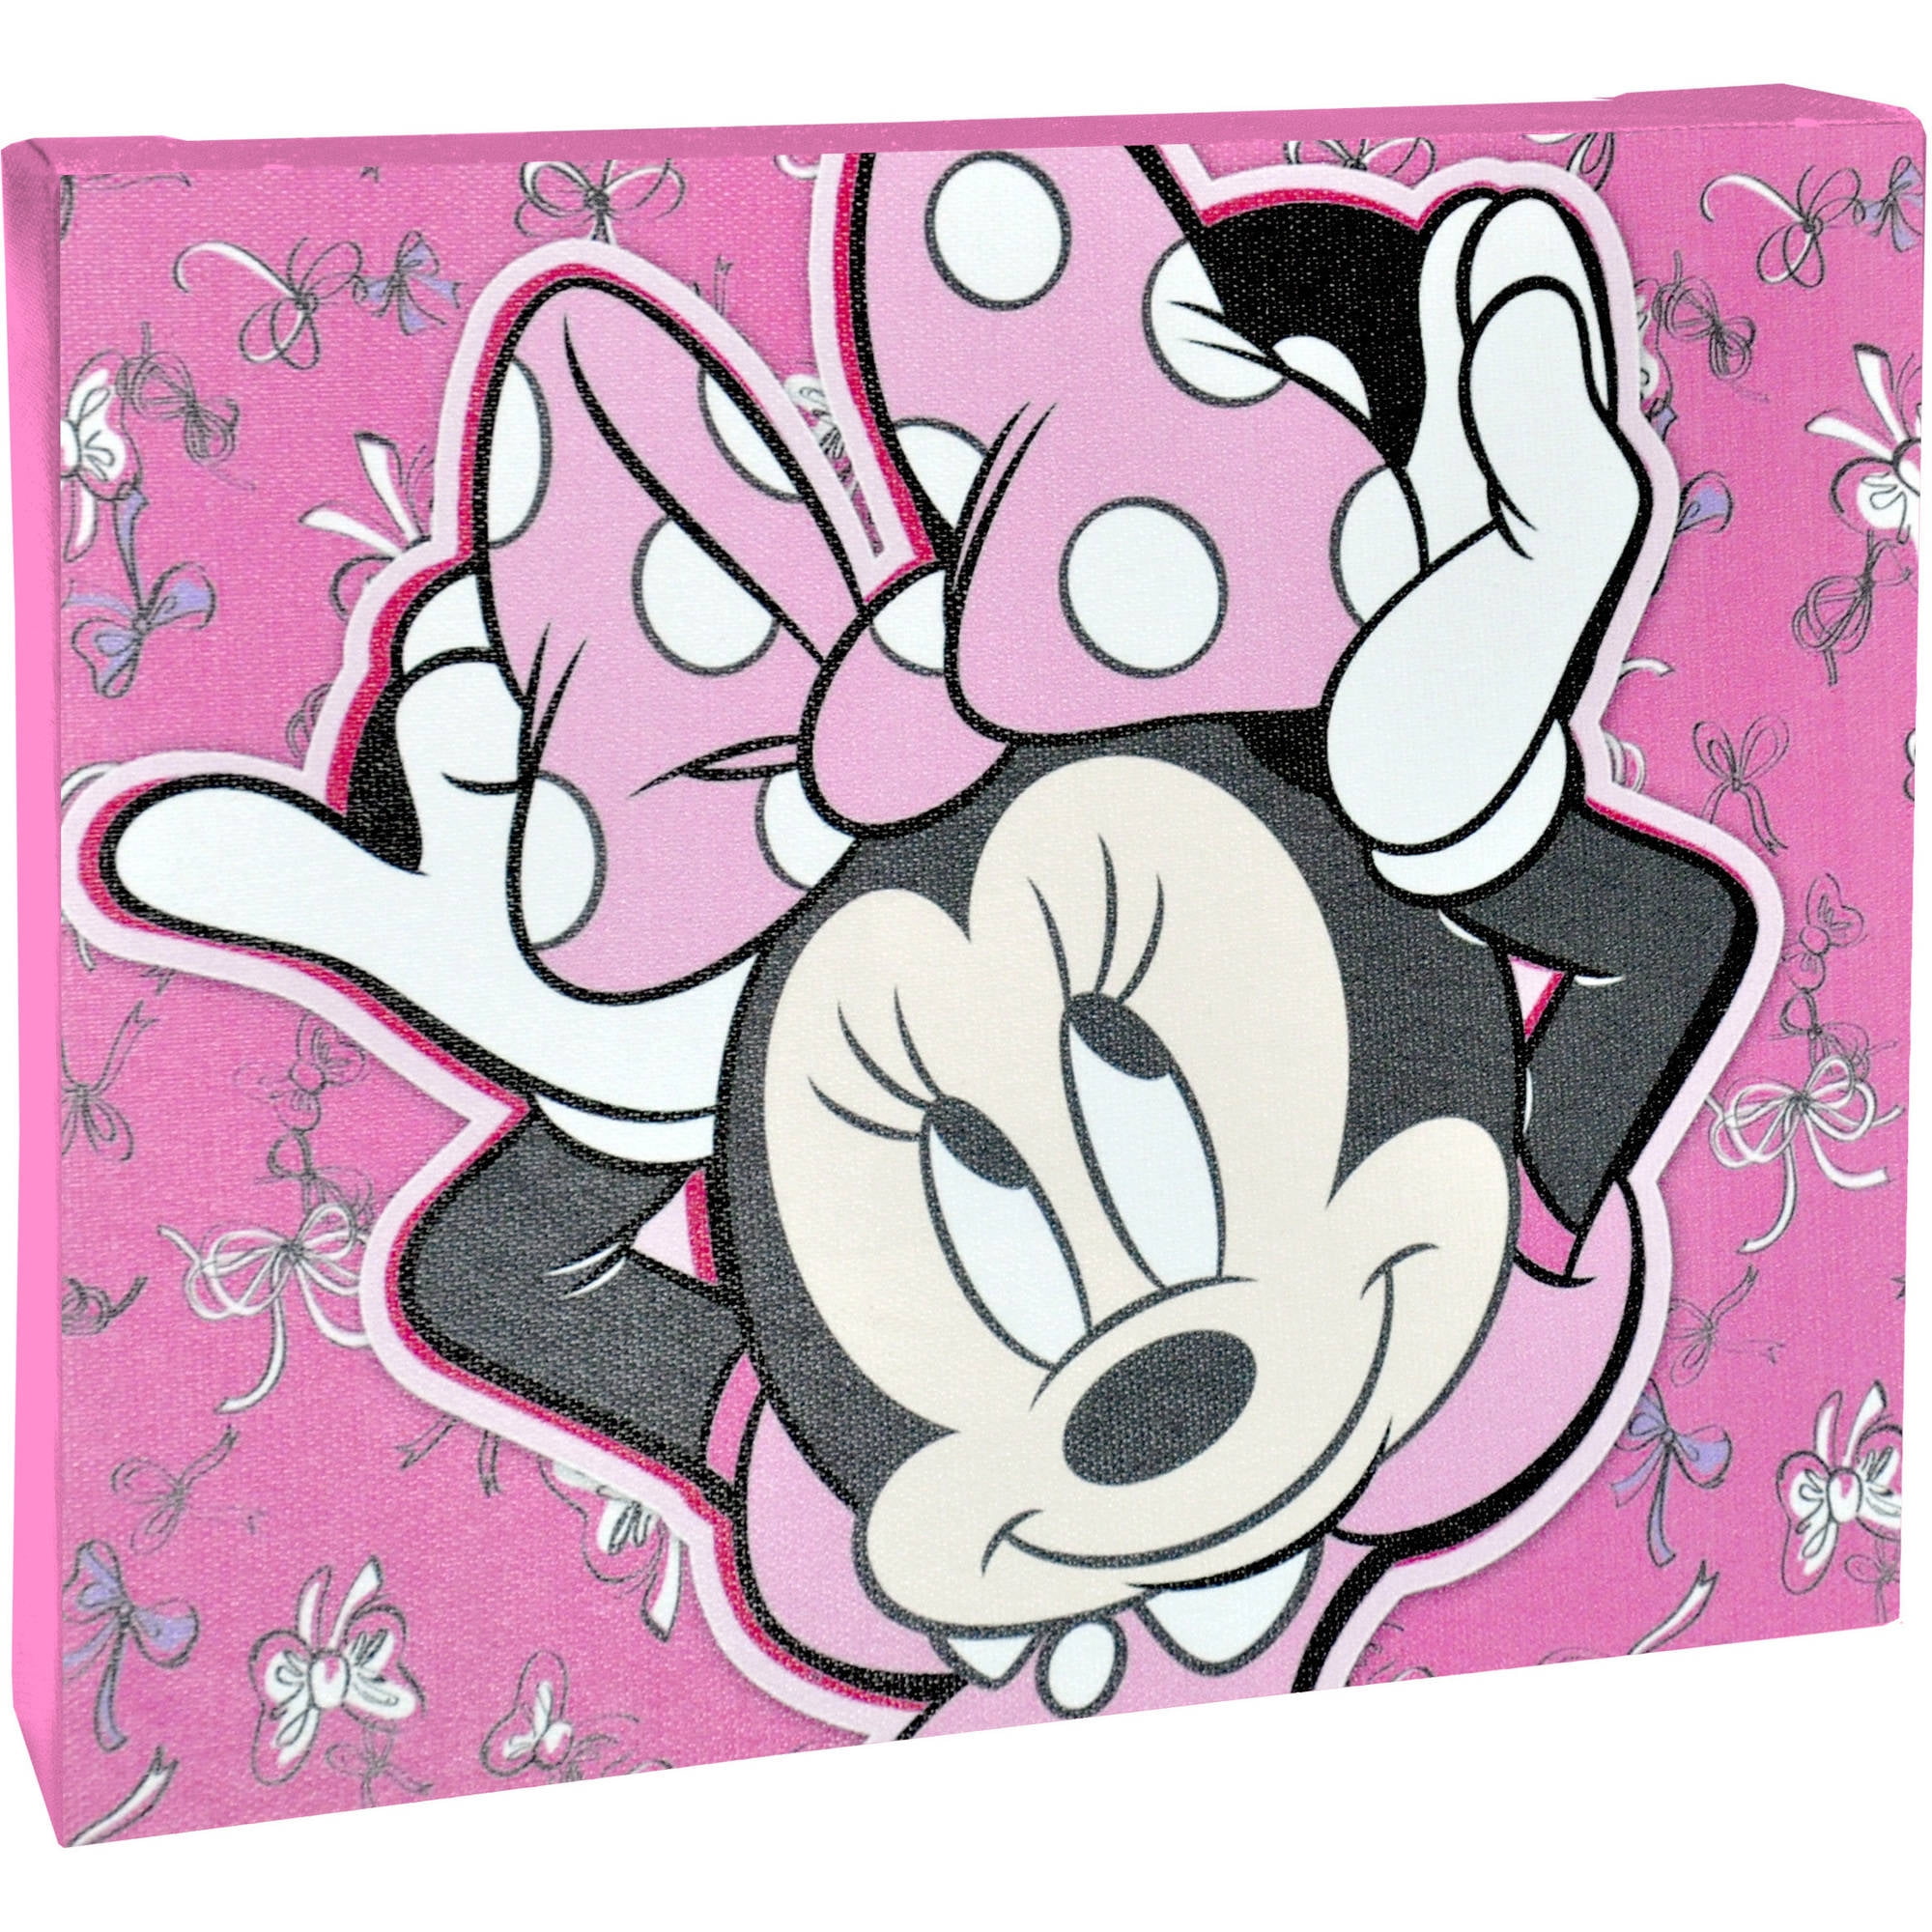 DISNEY MINNIE MOUSE A LITTLE CUTE GOES A LONG WAY PINK WALL DECOR. 